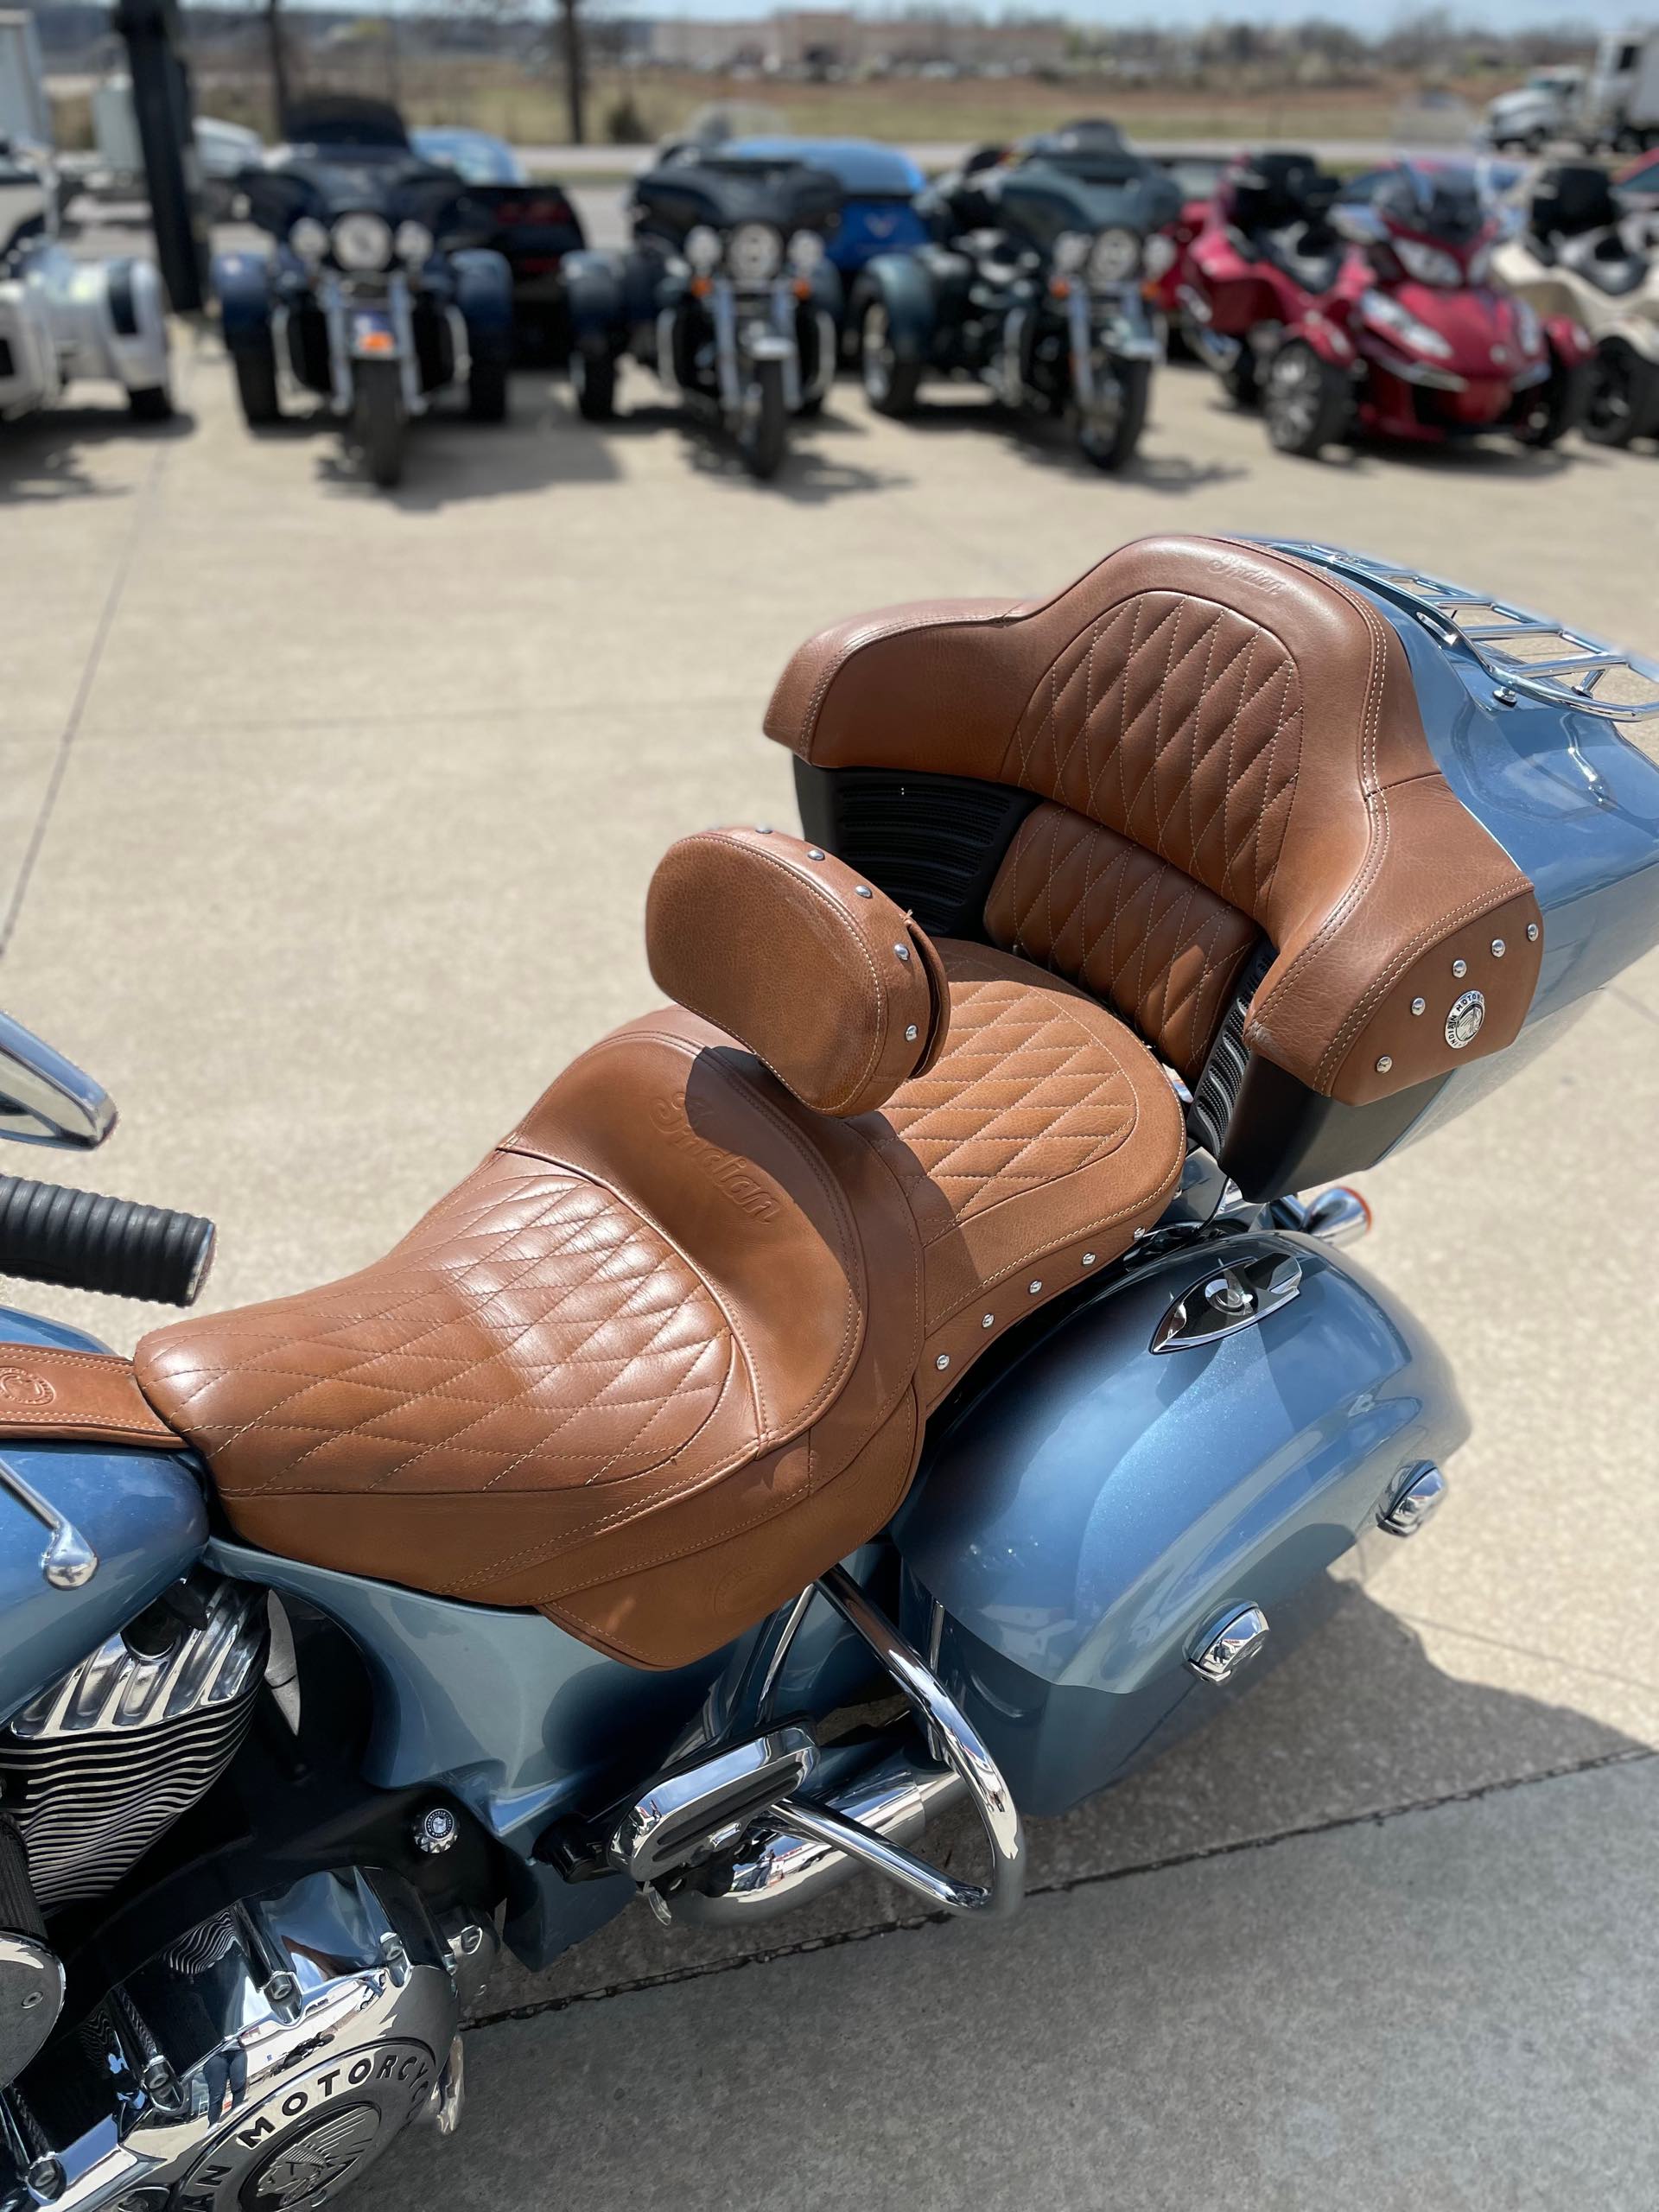 2016 Indian Roadmaster Base at Head Indian Motorcycle